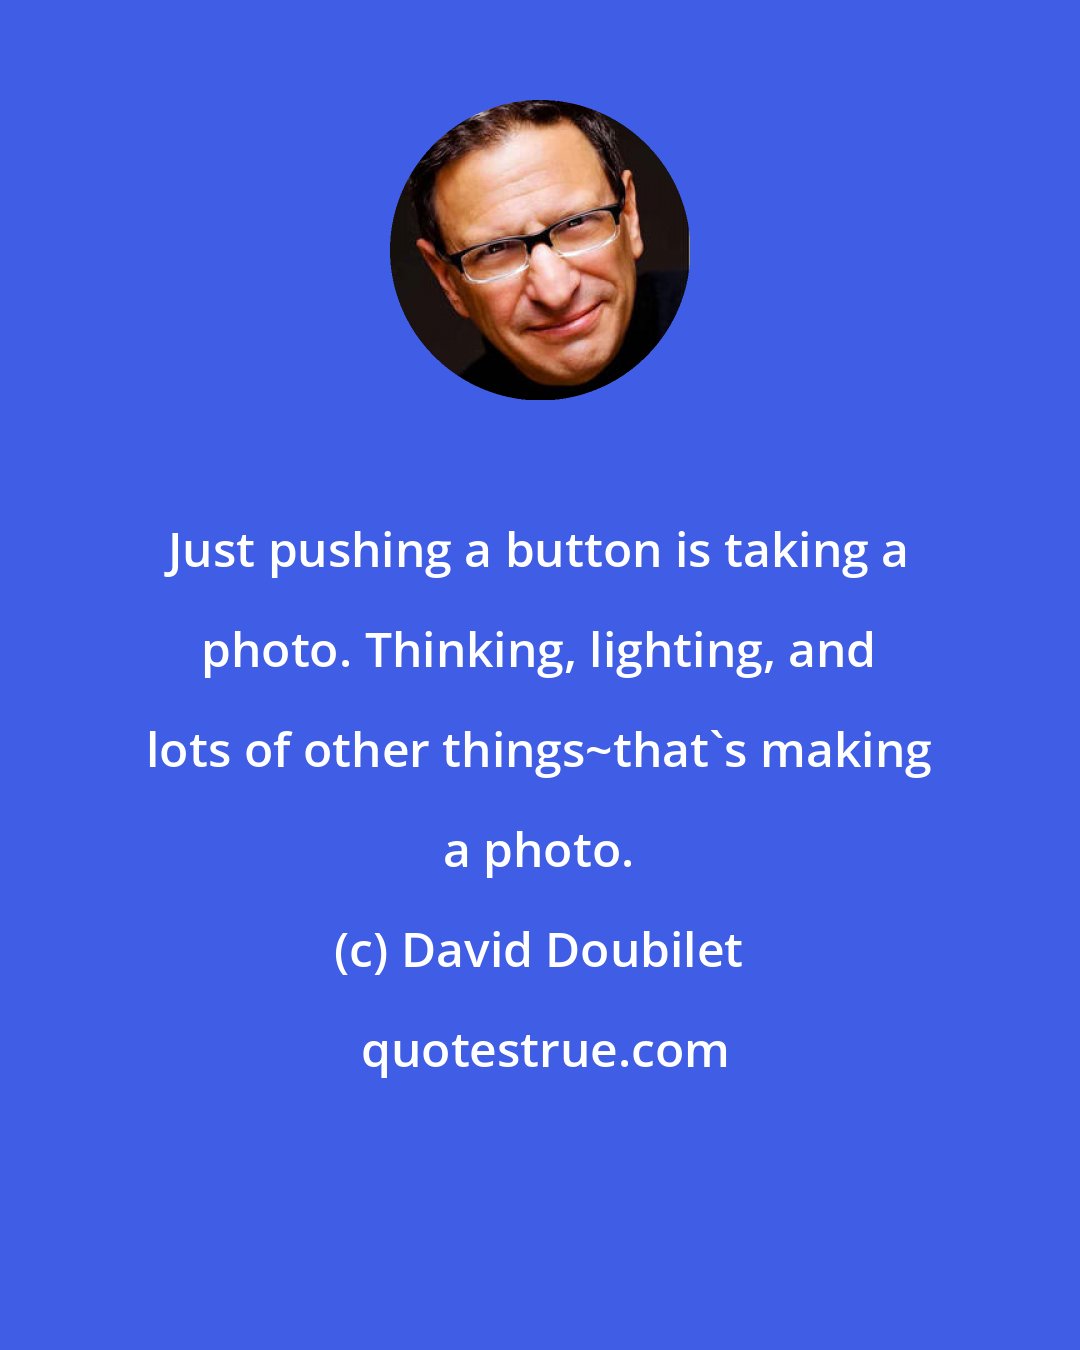 David Doubilet: Just pushing a button is taking a photo. Thinking, lighting, and lots of other things~that's making a photo.